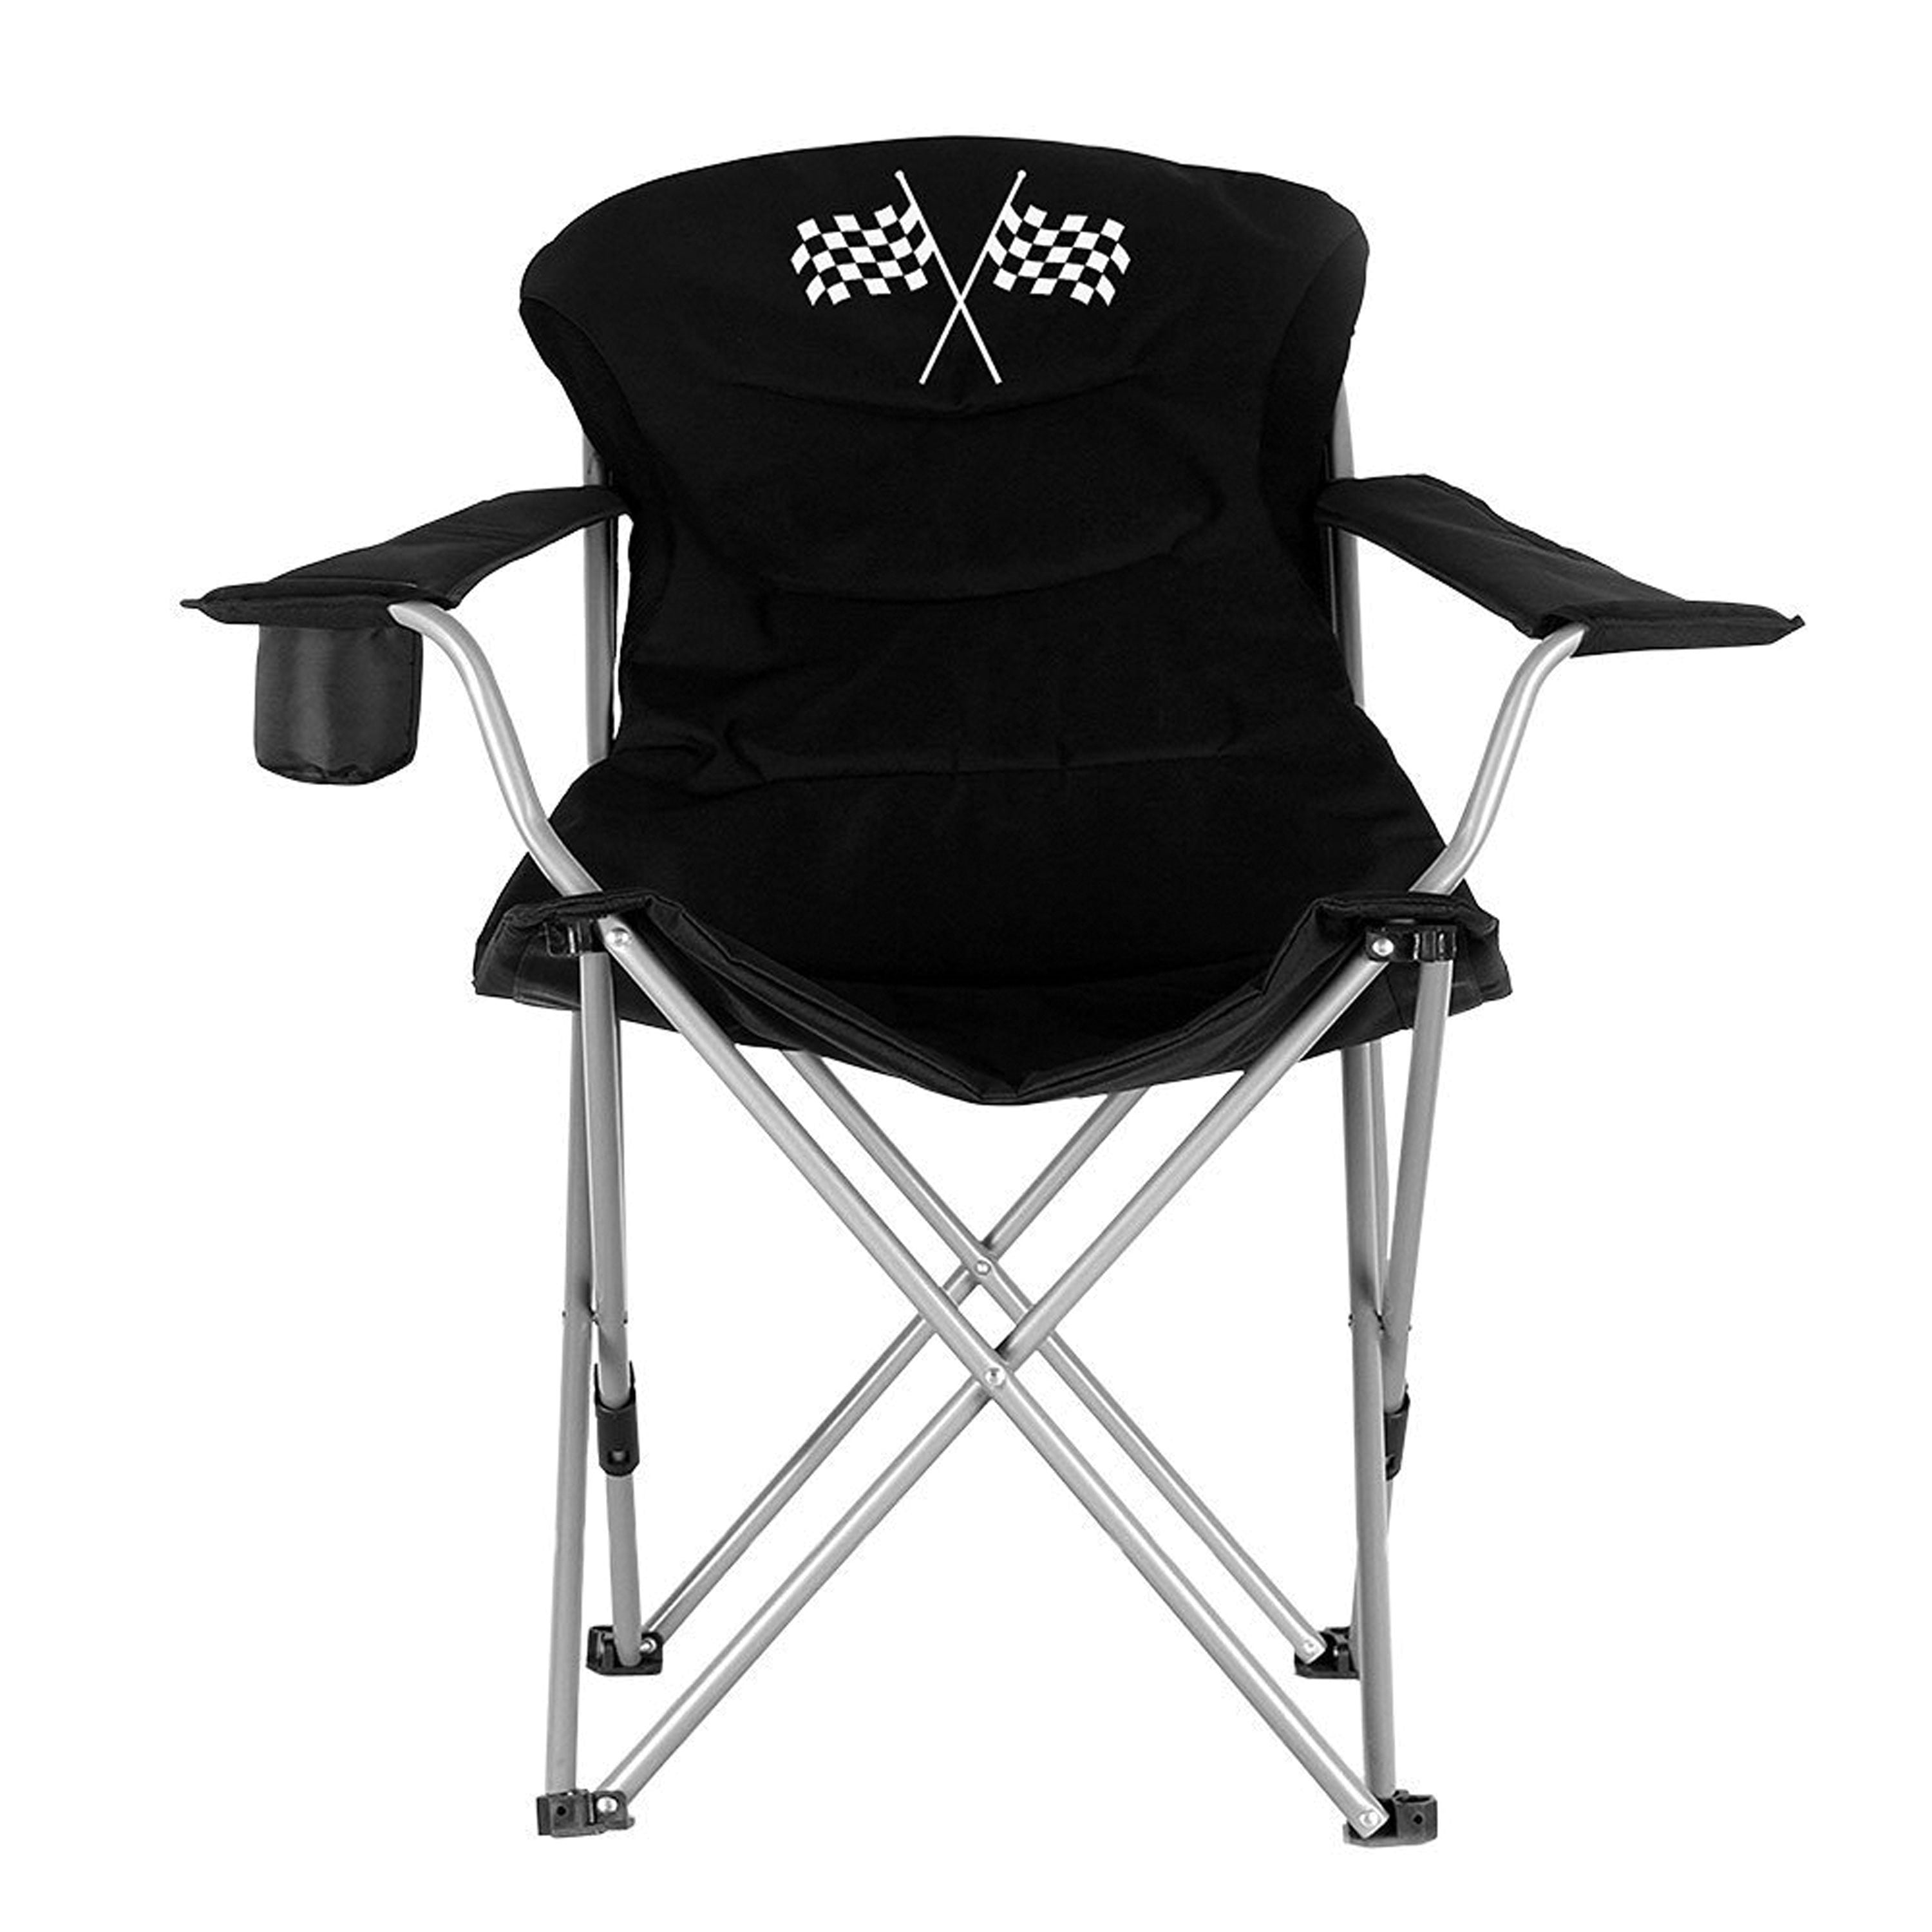 Ming's Mark 36029 Foldable Reclining Camp Chair - Black with Checkered Flag